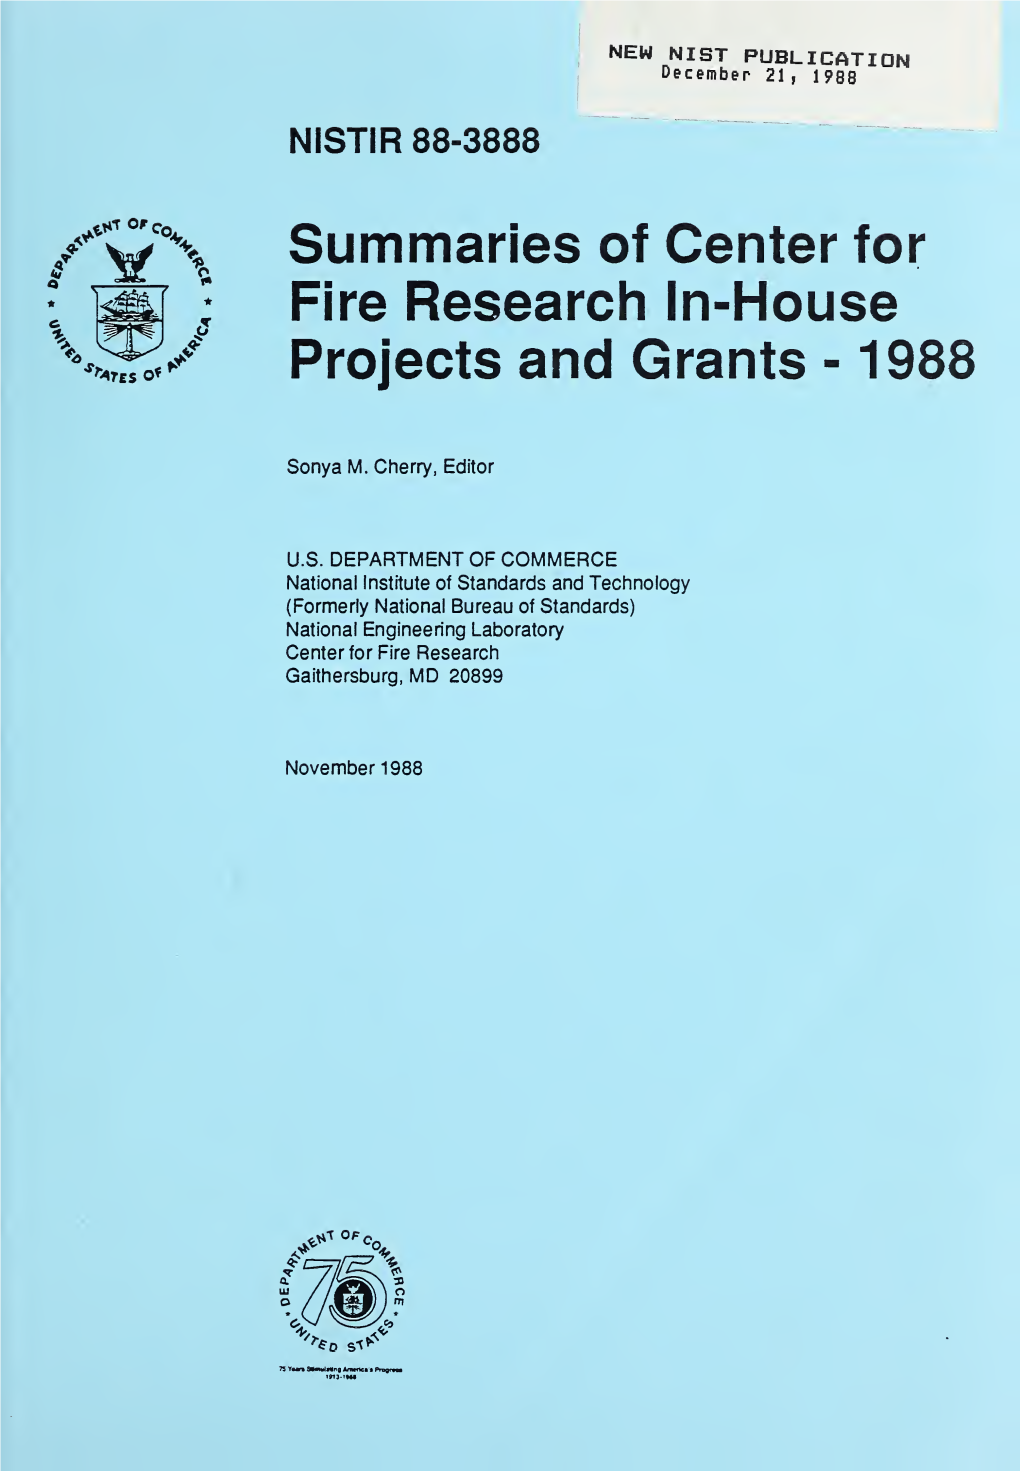 Summaries of Center for Fire Research In-House Projects and Grants - 1988